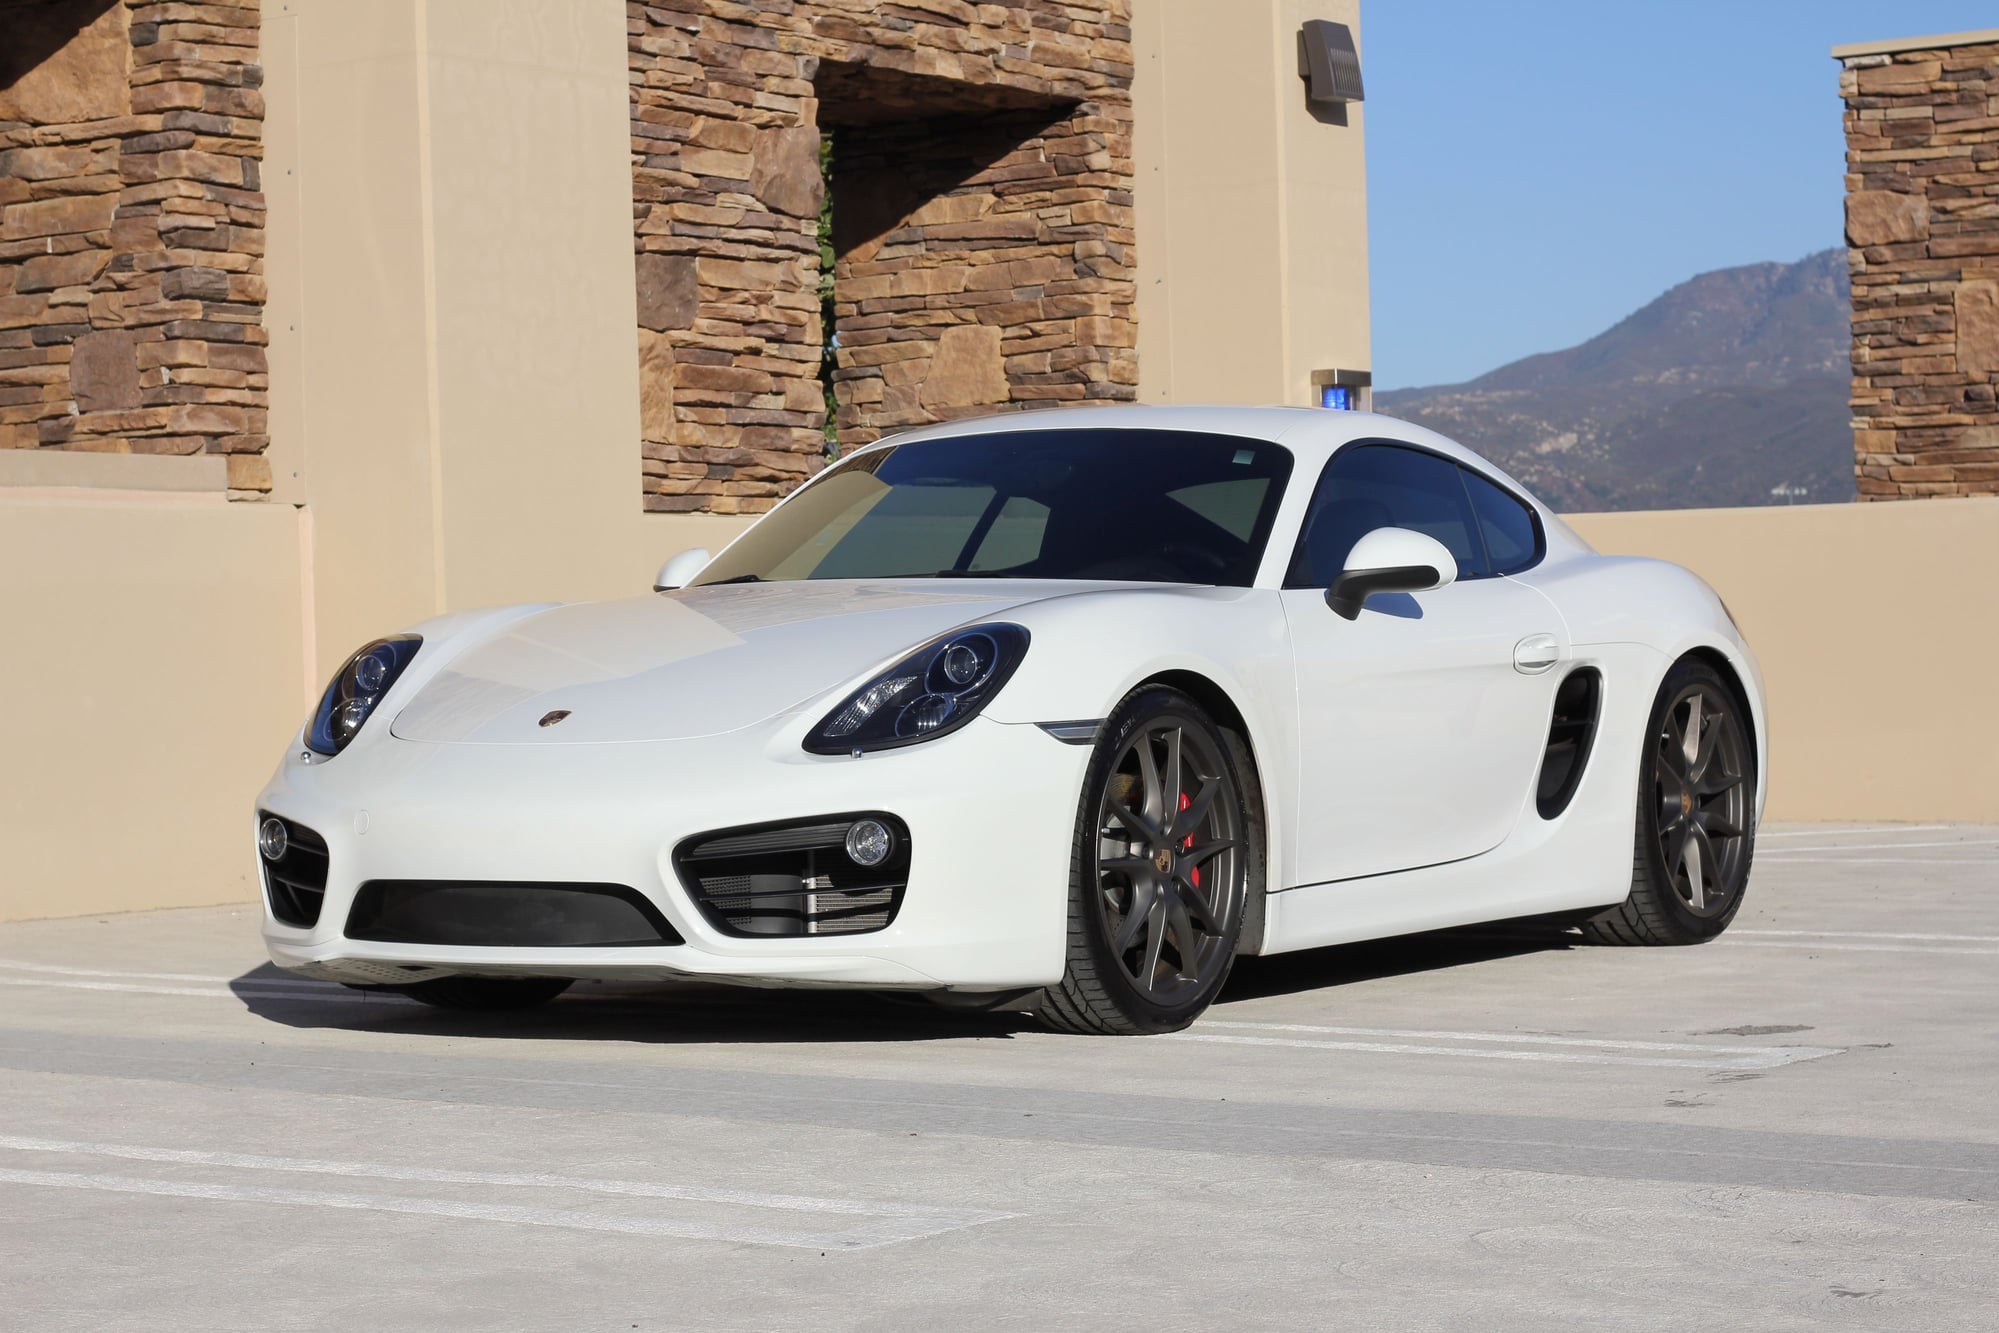 2014 Porsche Cayman - 2014 Cayman S ....Minty white on black with X73 and much more - Used - VIN WPOAB2A81EK192443 - 6 cyl - 2WD - Automatic - Coupe - White - Temecula, CA 92592, United States